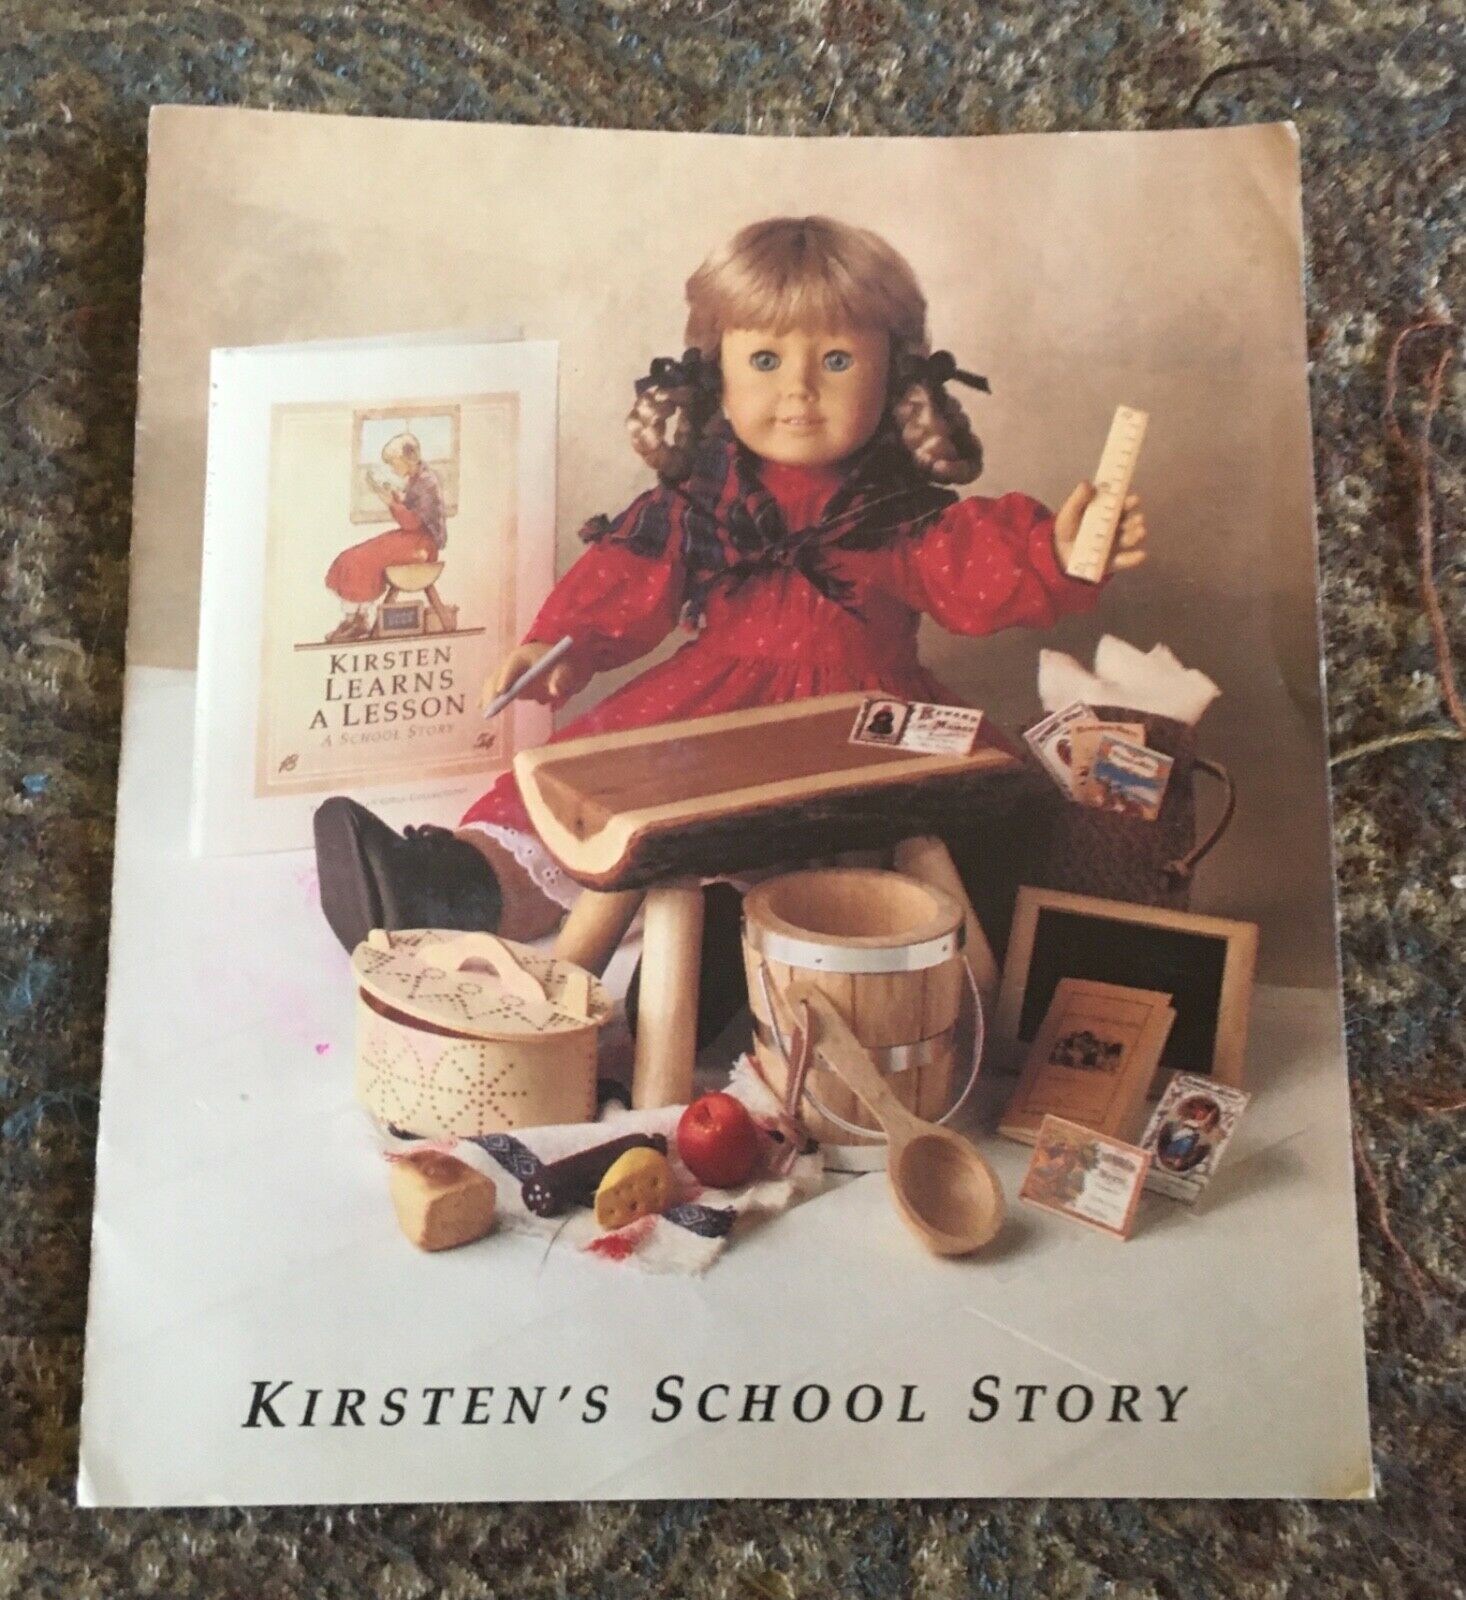 Pleasant Company ( American Girl) Pamphlet Kirsten’s School Story